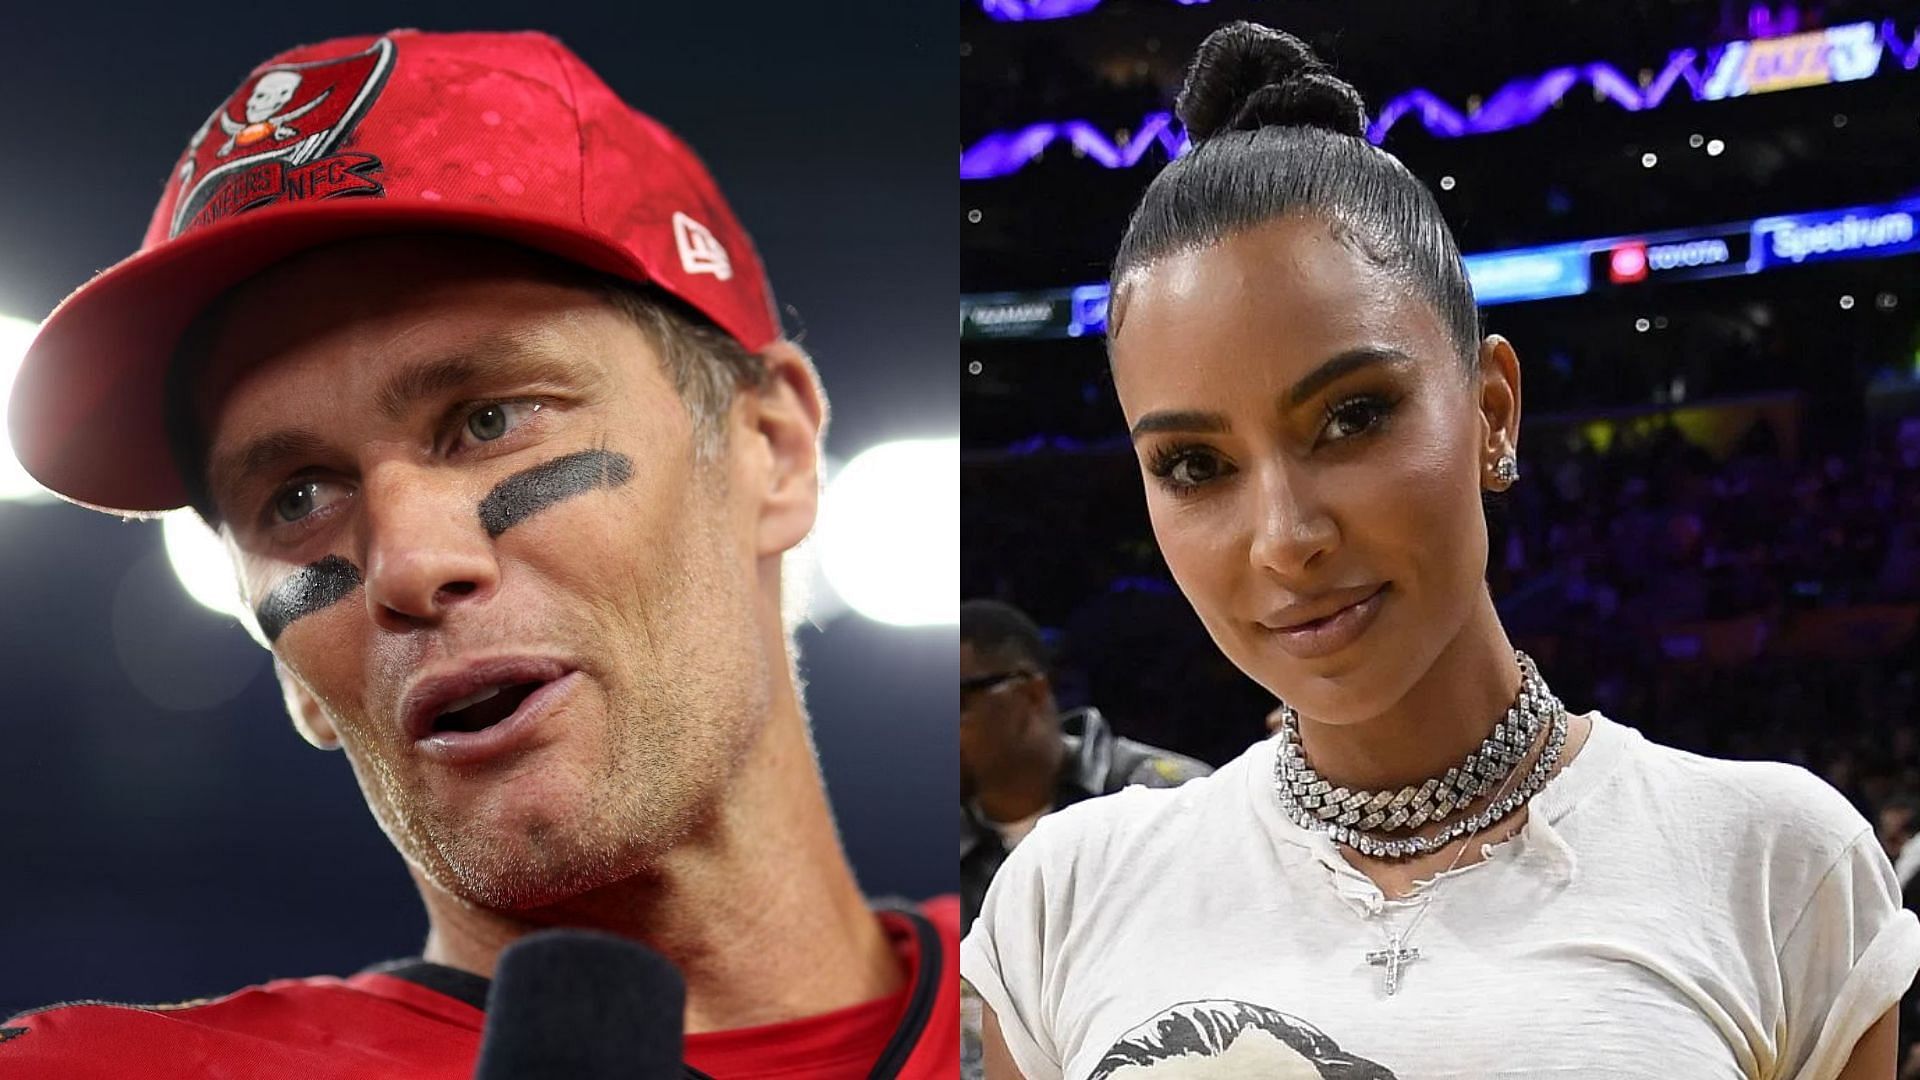 Tom Brady and Kim Kardashian reportedly had a good time with each other during Fanatics CEO Michael Rubin